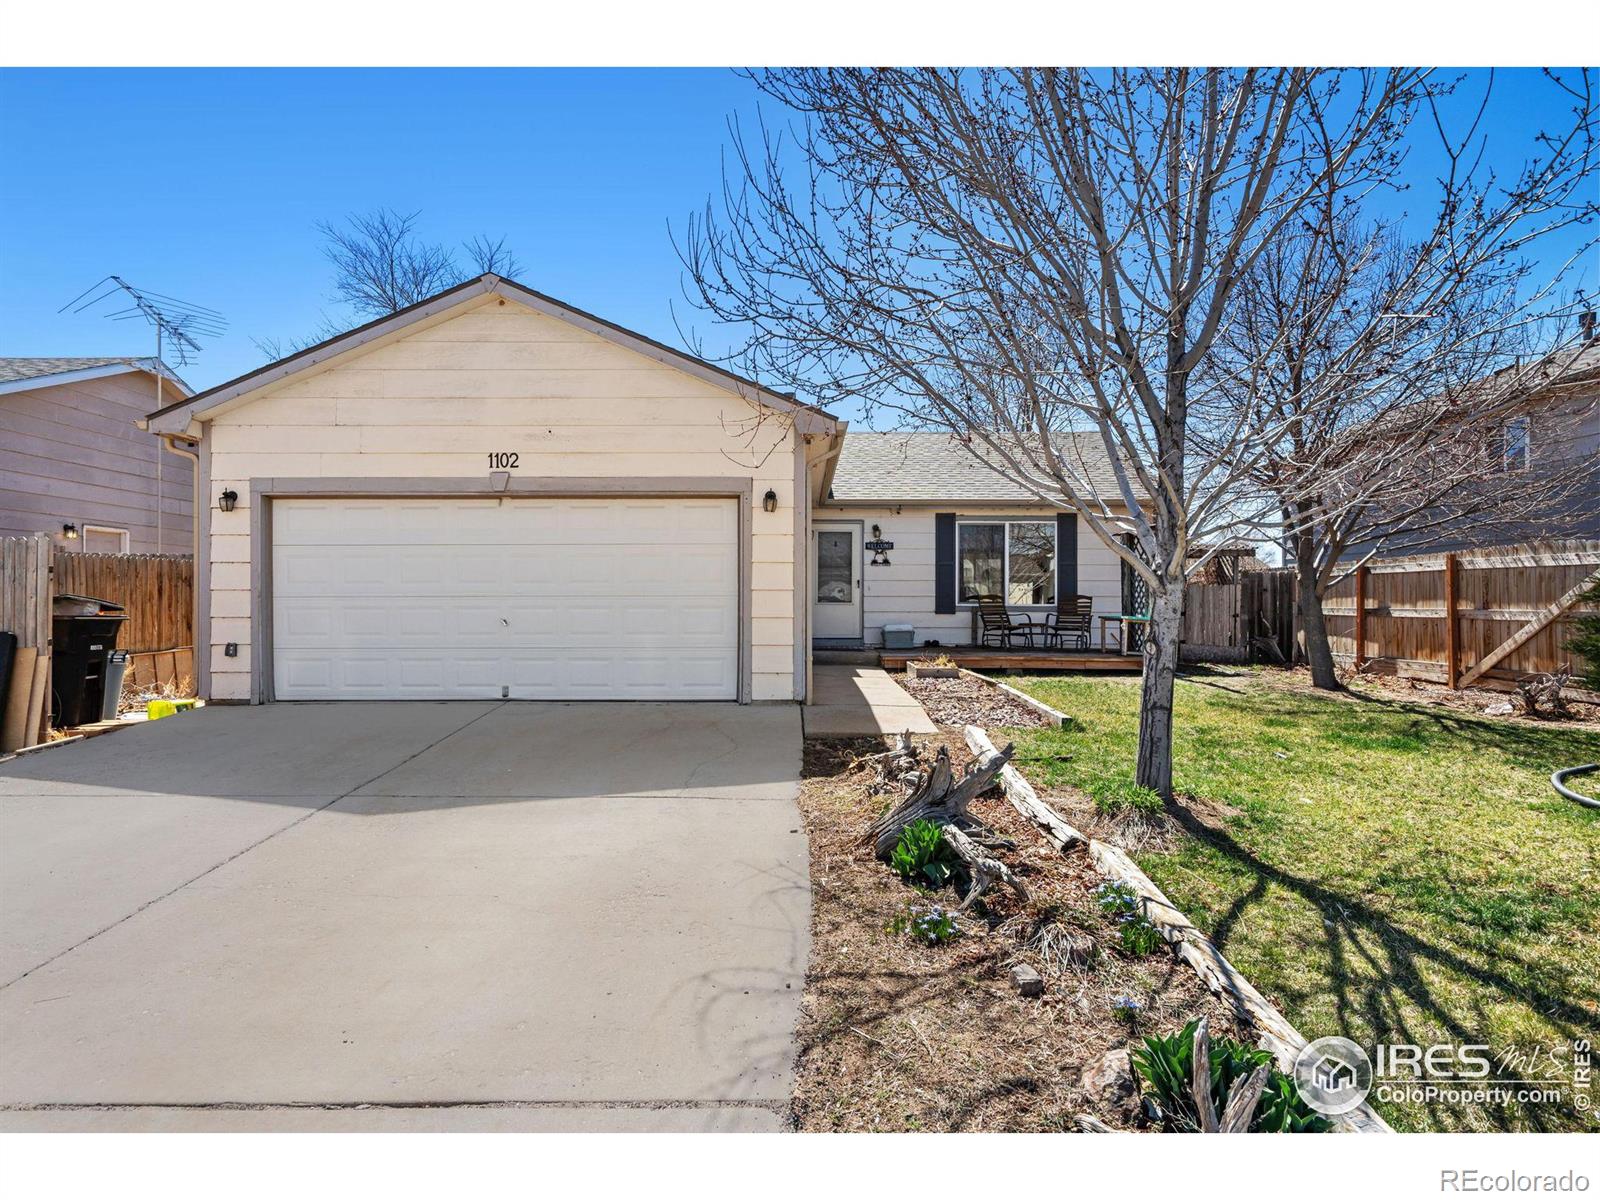 1102 E 25th St Rd, greeley MLS: 4567891006561 Beds: 2 Baths: 2 Price: $355,000